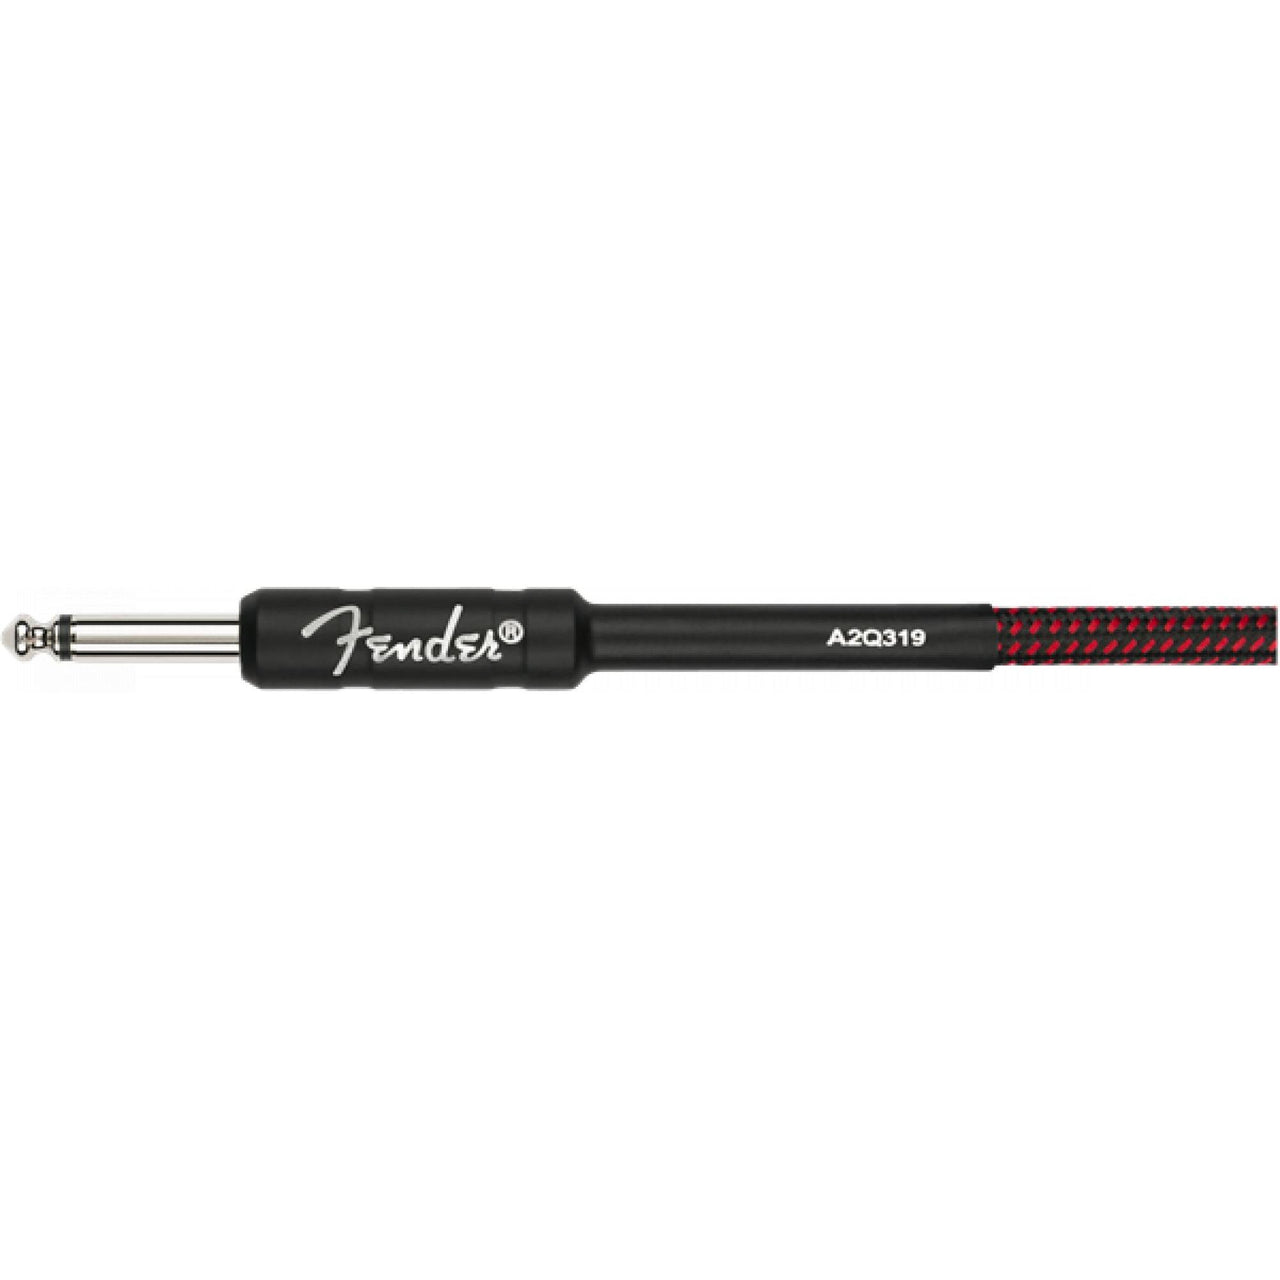 Cable Fender P/guitarra 9 Mts Pro Coil Red Twd, 0990823054